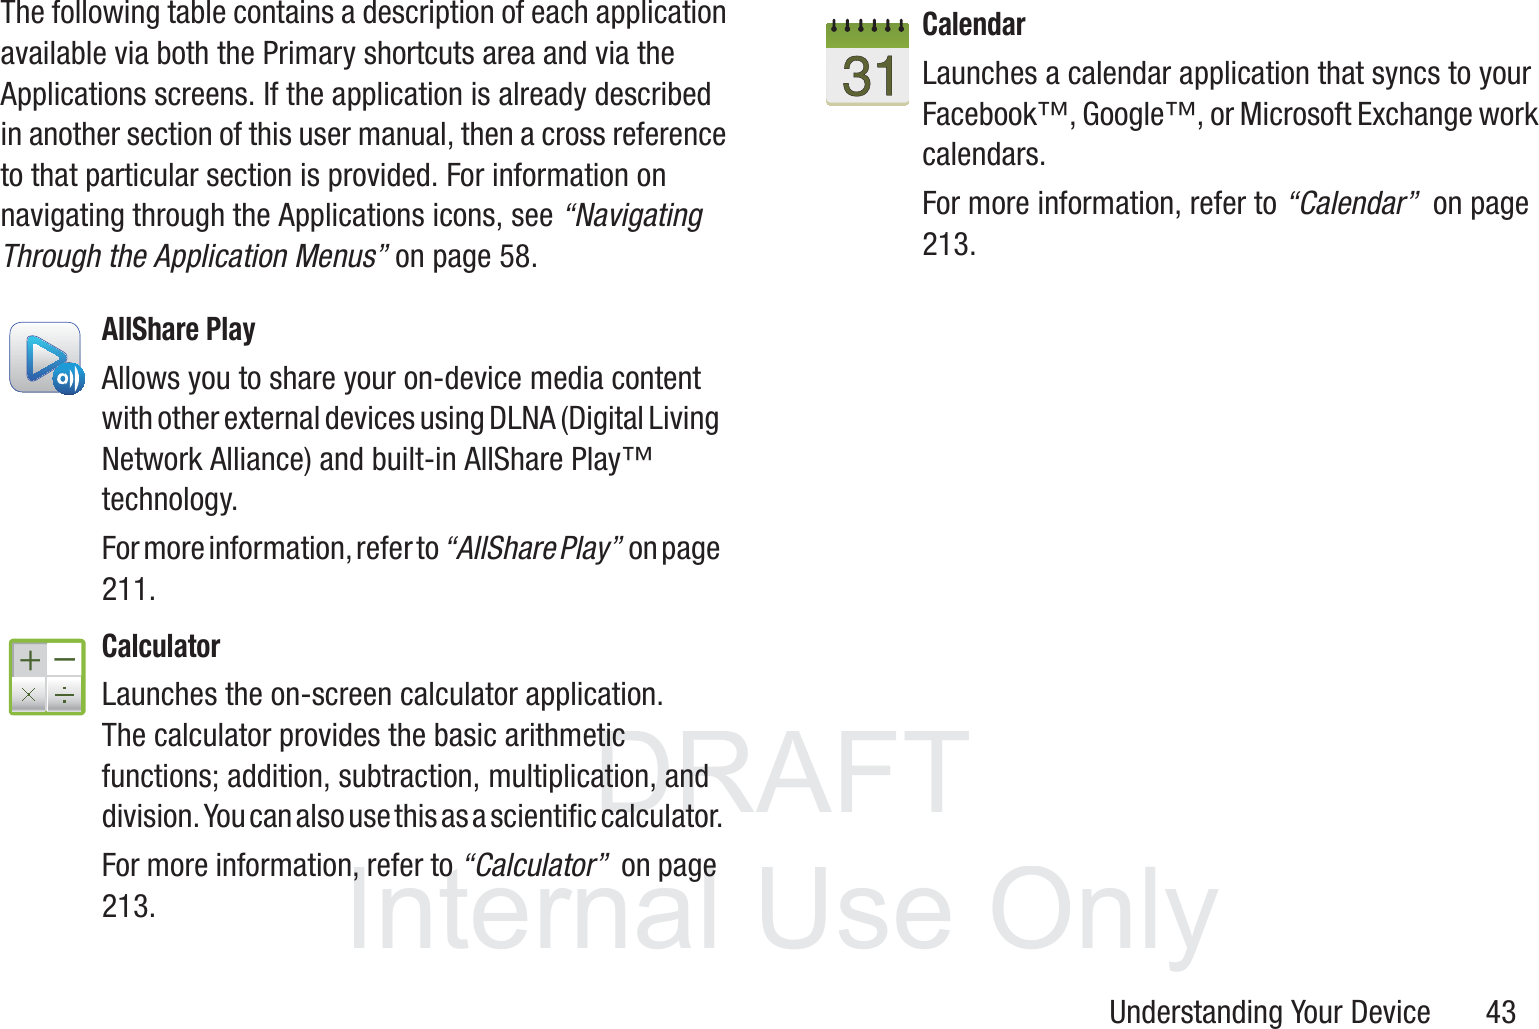 DRAFT InternalUse OnlyUnderstanding Your Device       43The following table contains a description of each application available via both the Primary shortcuts area and via the Applications screens. If the application is already described in another section of this user manual, then a cross reference to that particular section is provided. For information on navigating through the Applications icons, see “Navigating Through the Application Menus” on page 58.    AllShare PlayAllows you to share your on-device media content with other external devices using DLNA (Digital Living Network Alliance) and built-in AllShare Play™ technology. For more information, refer to “AllShare Play”  on page 211.CalculatorLaunches the on-screen calculator application. The calculator provides the basic arithmetic functions; addition, subtraction, multiplication, and division. You can also use this as a scientific calculator.For more information, refer to “Calculator”  on page 213.CalendarLaunches a calendar application that syncs to your Facebook™, Google™, or Microsoft Exchange work calendars. For more information, refer to “Calendar”  on page 213.